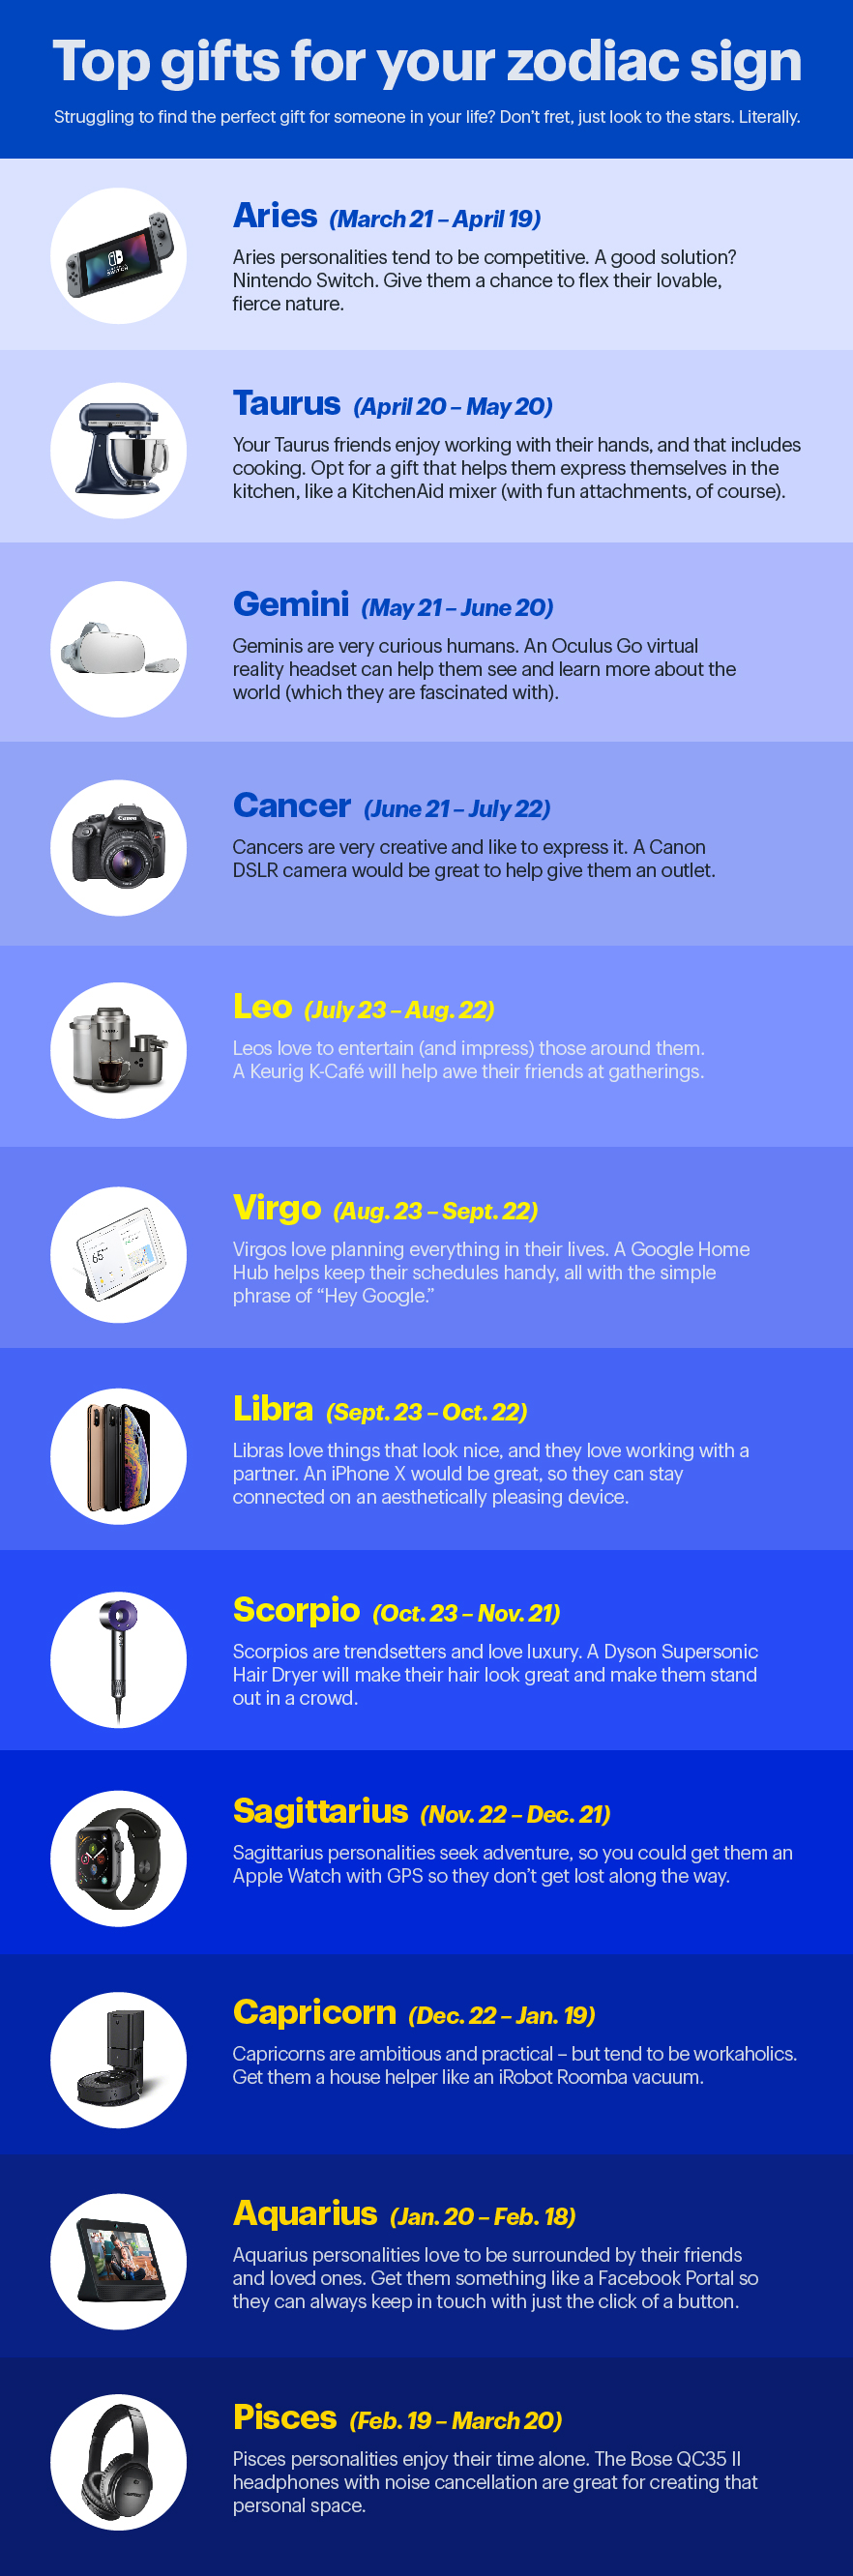 Gifts by zodiac sign